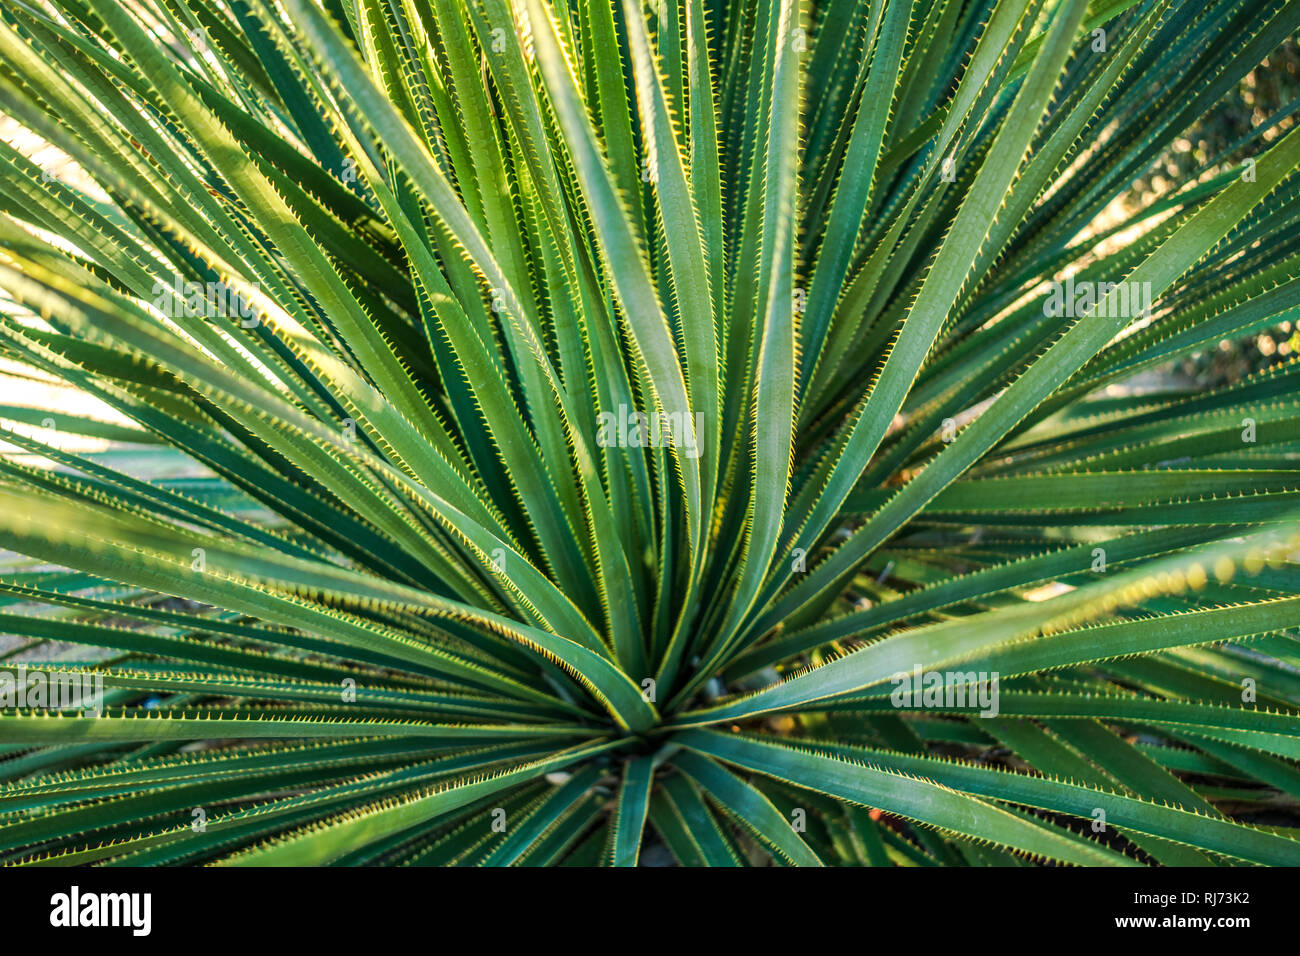 A close-up image of a desert plant with long narrow leaves covered with spikes - dasylirion Stock Photo